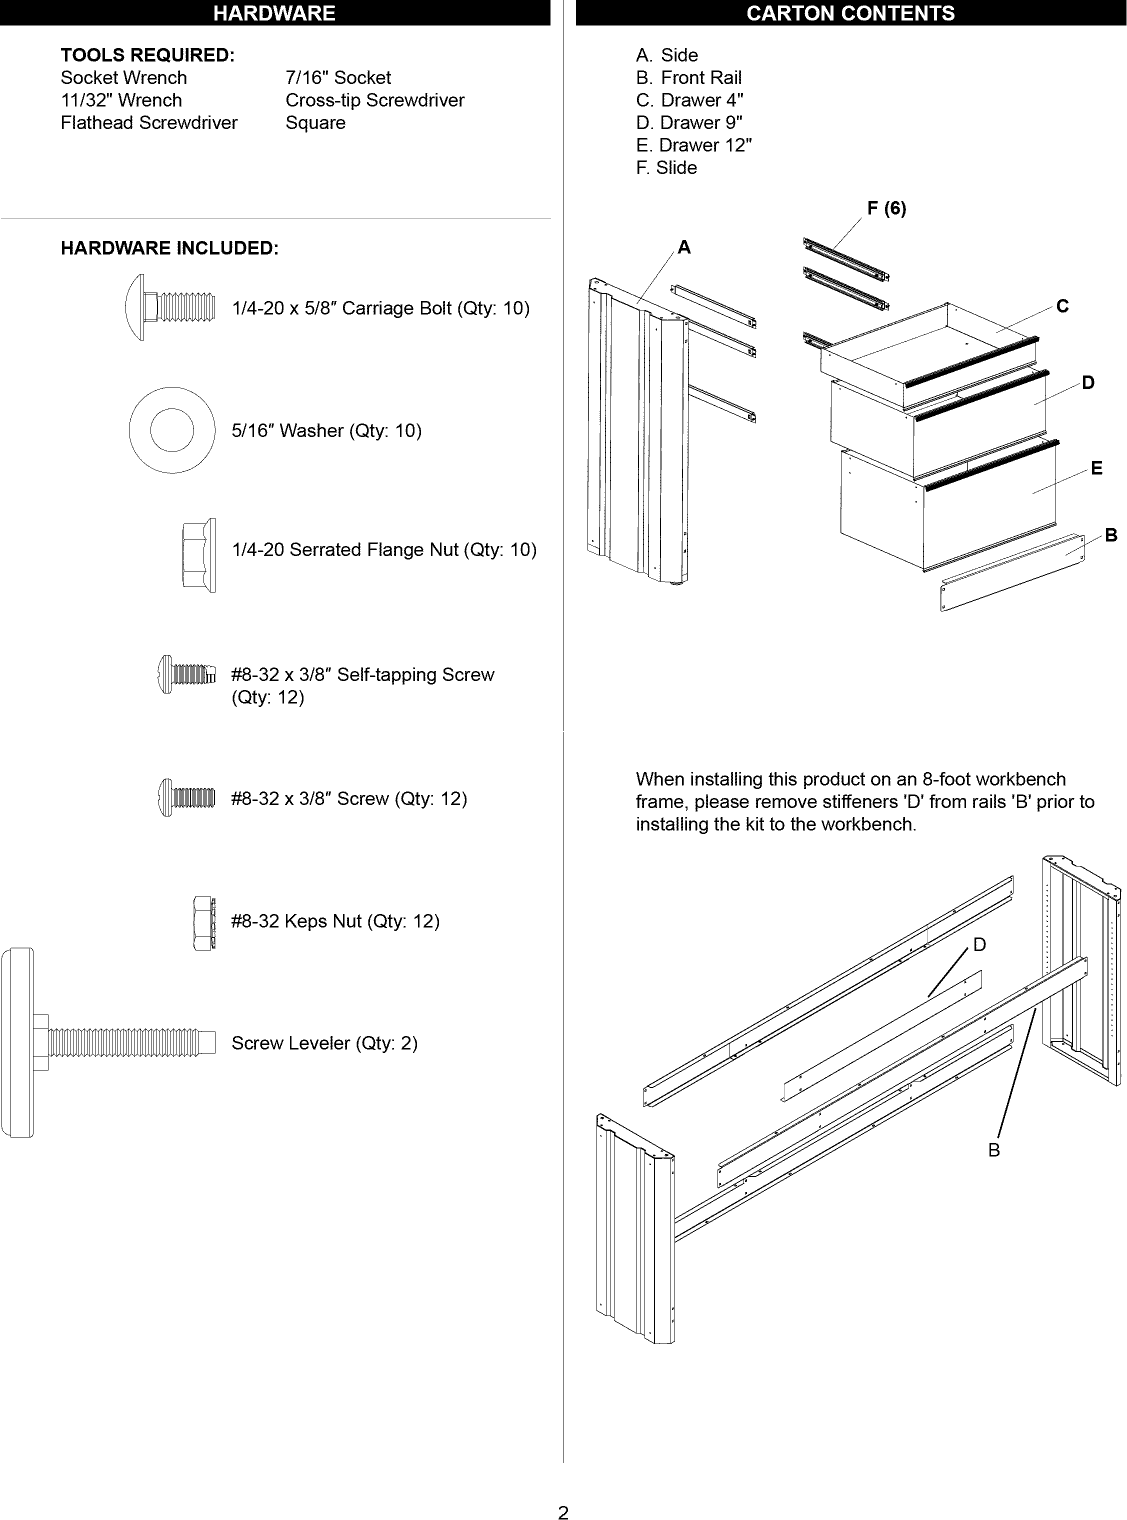 Page 2 of 10 - Craftsman 706149260 1108813L User Manual  3 DRAWER ACCESSORY - Manuals And Guides